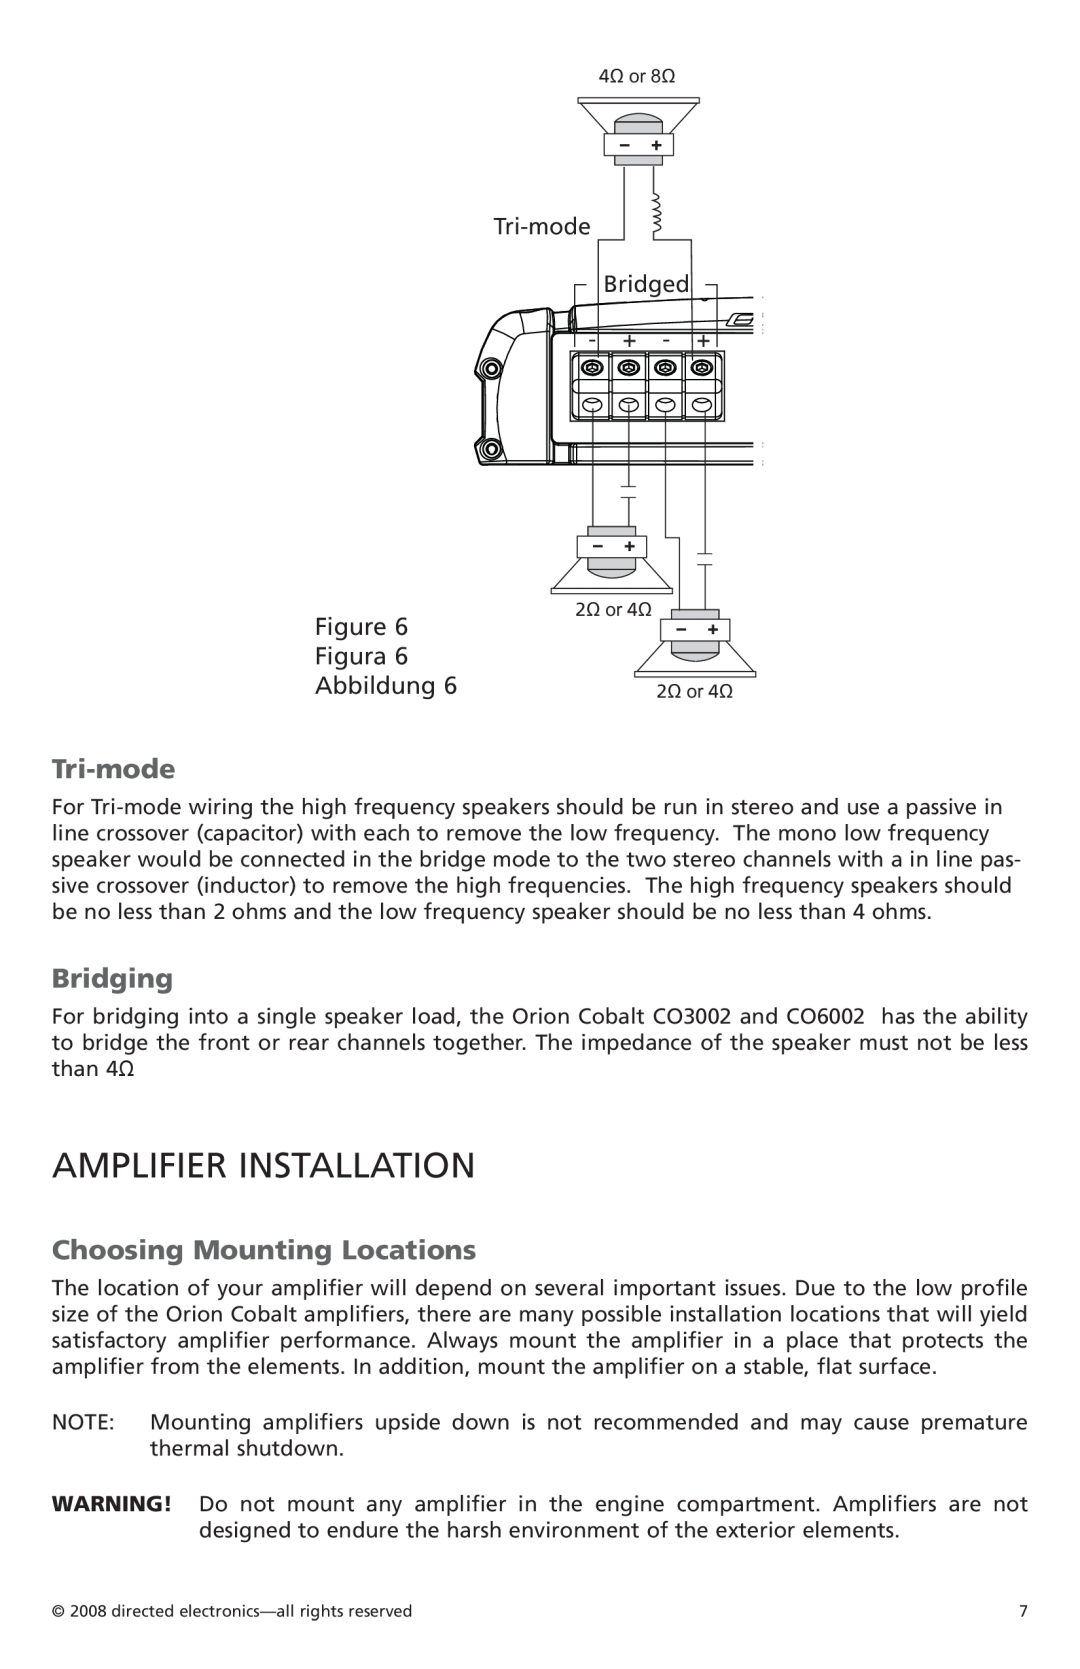 Orion Car Audio CO6002, CO3002 owner manual Amplifier Installation, Tri-mode, Bridging, Choosing Mounting Locations, Bridged 